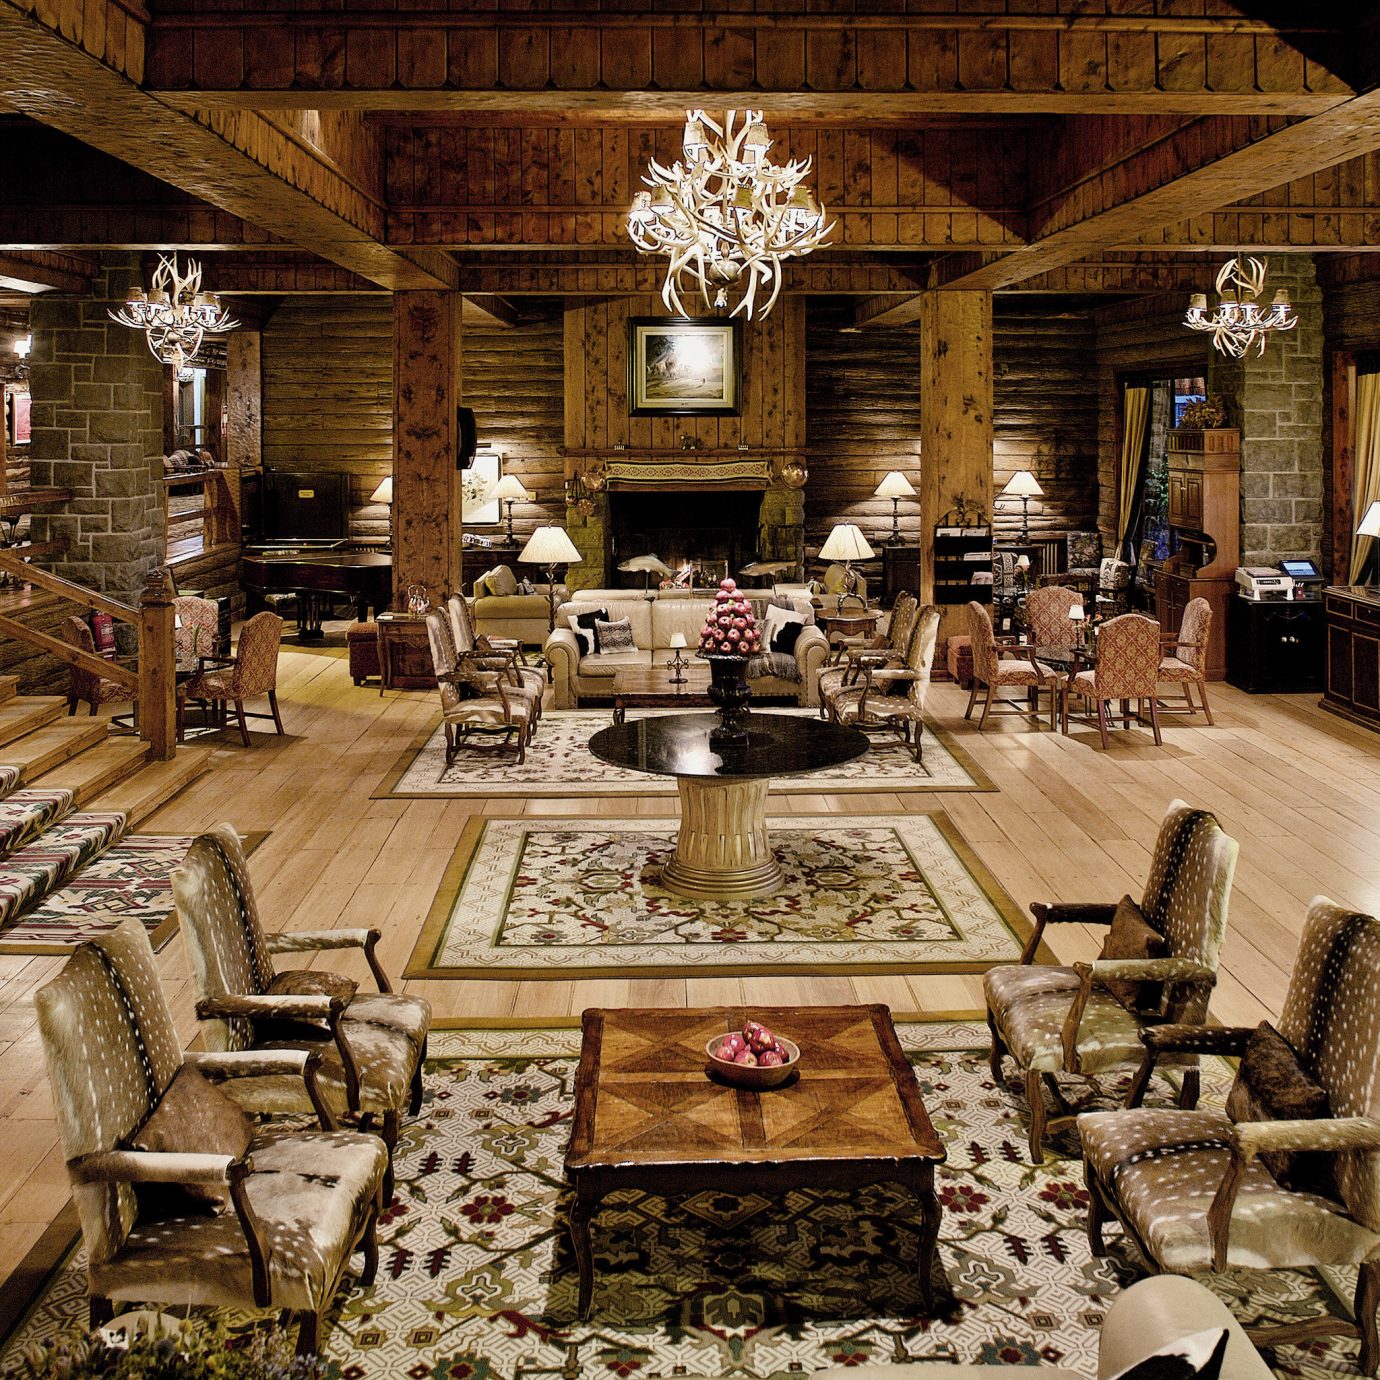 Fireplace Hotels Lobby Lounge Resort Rustic mansion restaurant ancient history